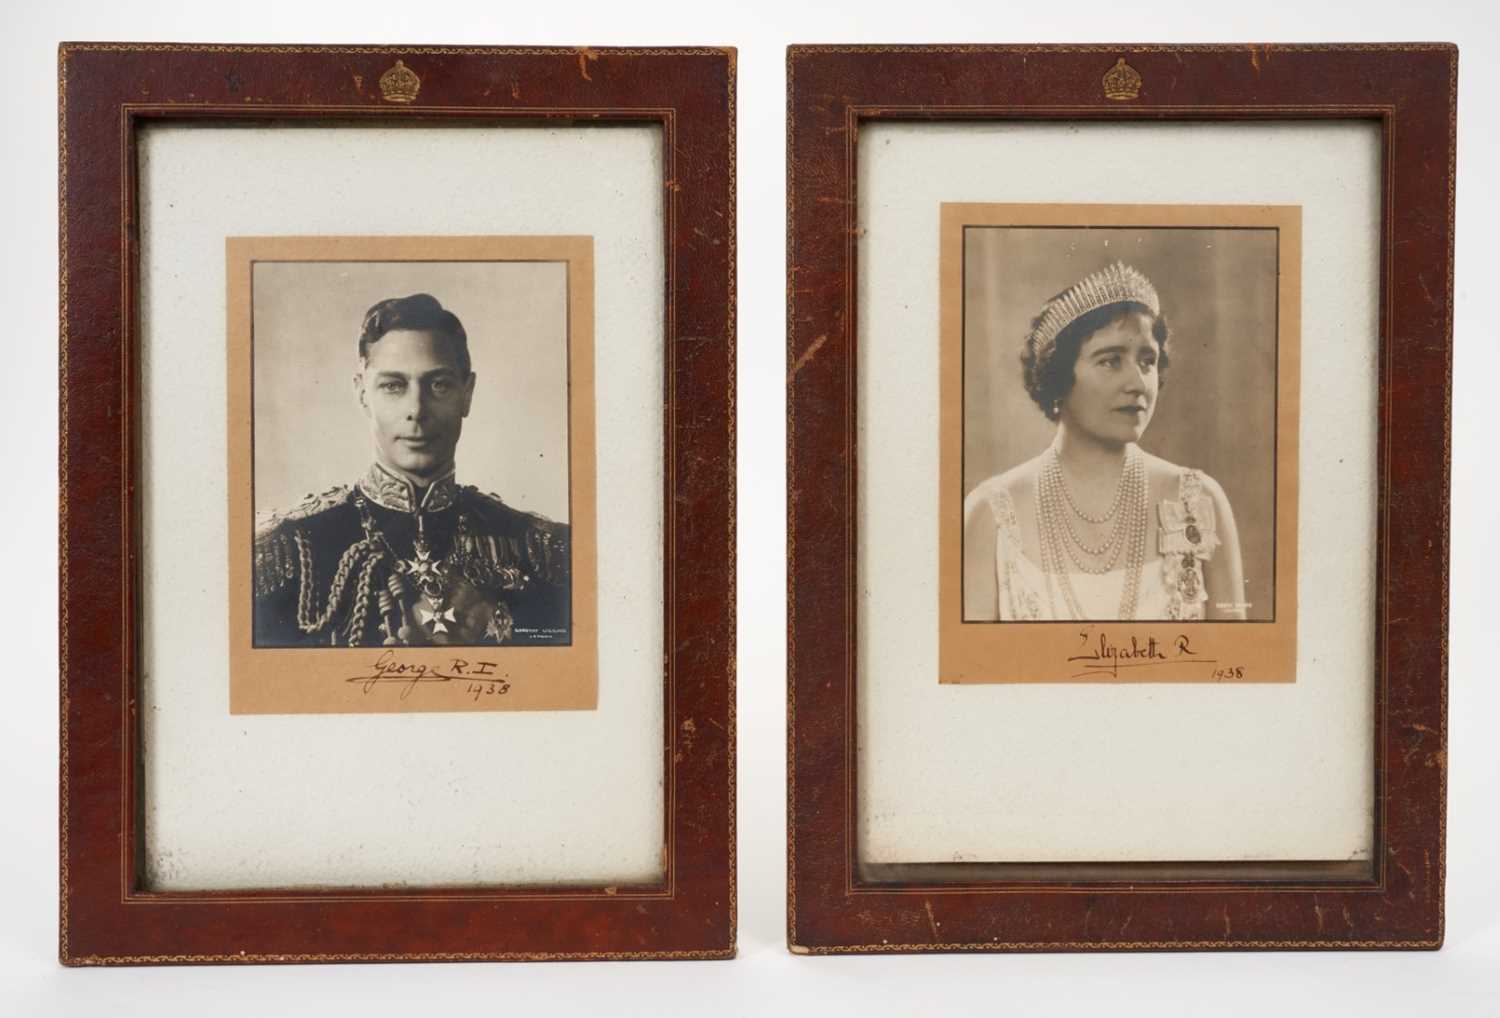 Lot 70 - T.M. King George VI and Queen Elizabeth, pair of signed presentation portrait photographs dated 1938, in origianl leather frames